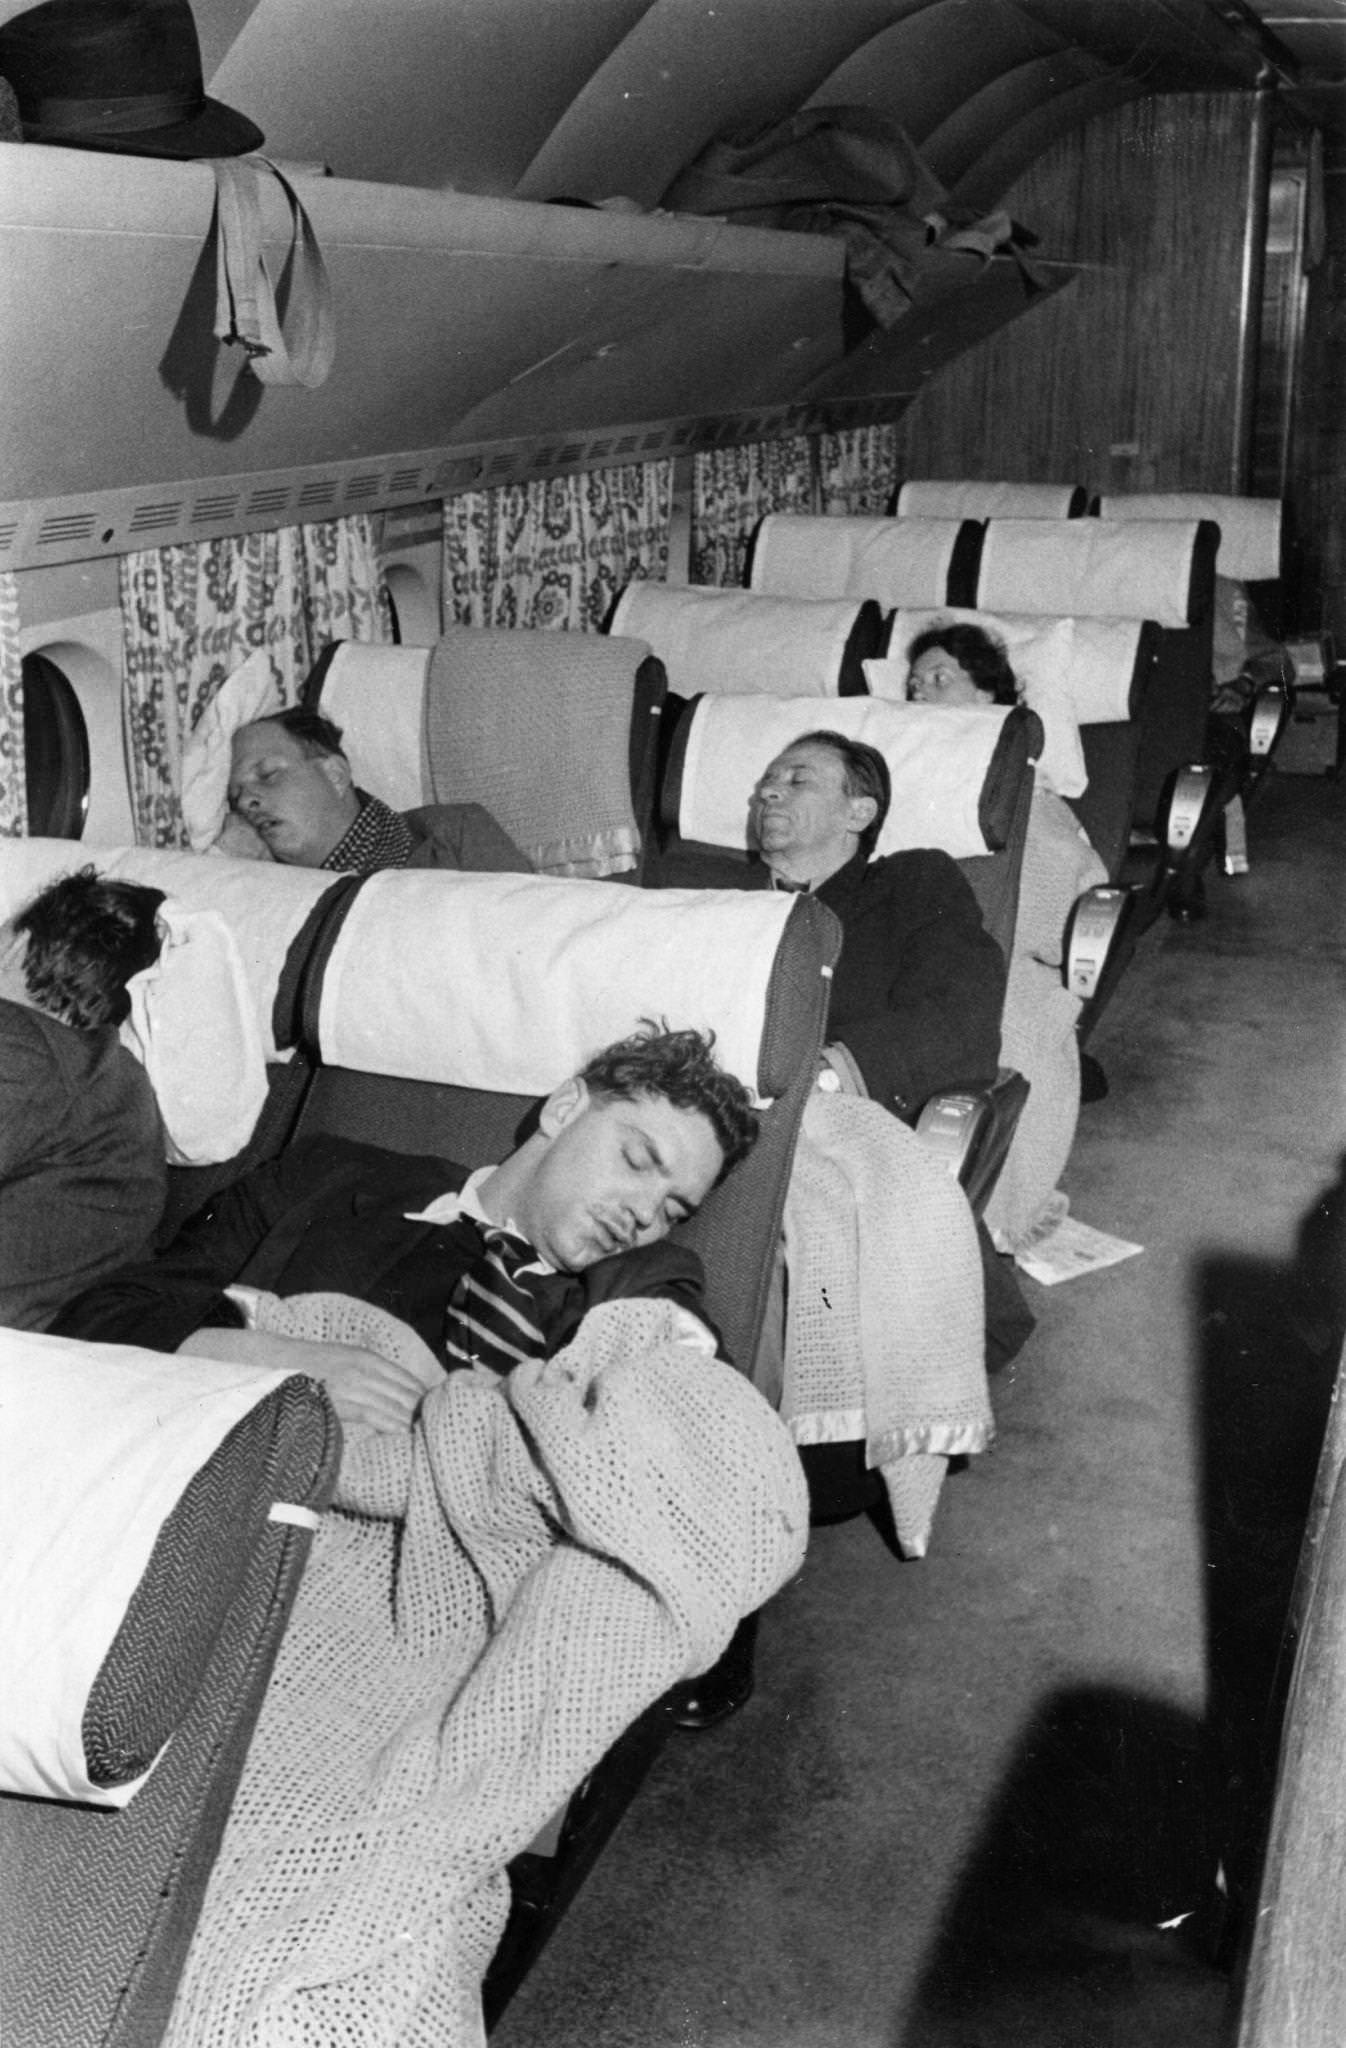 Travellers sleep on board an airplane in New York, as seen in this 1950 photo from Picture Post.